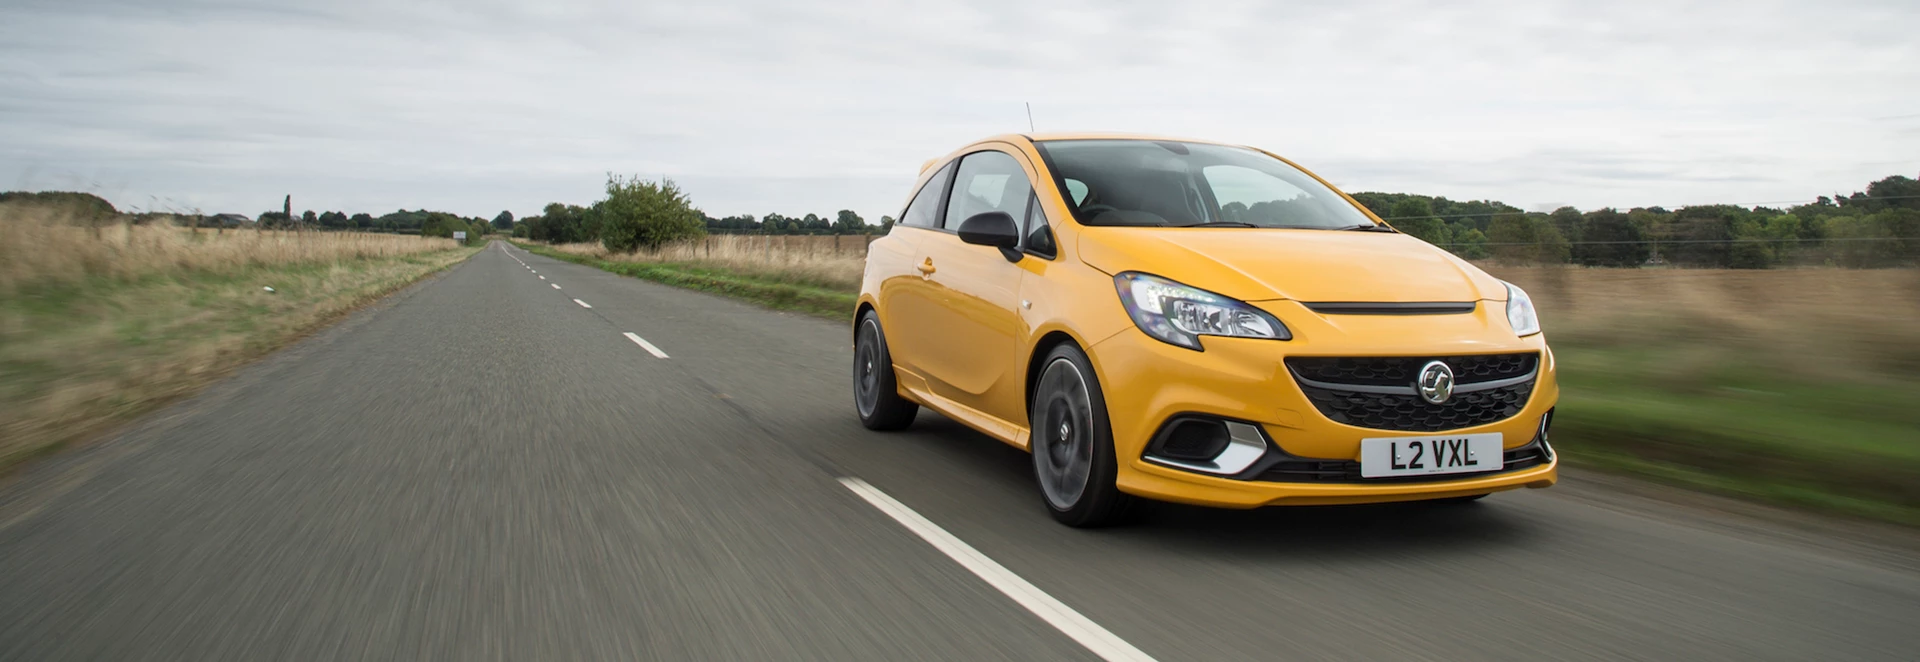 What to know about the Vauxhall Corsa GSi